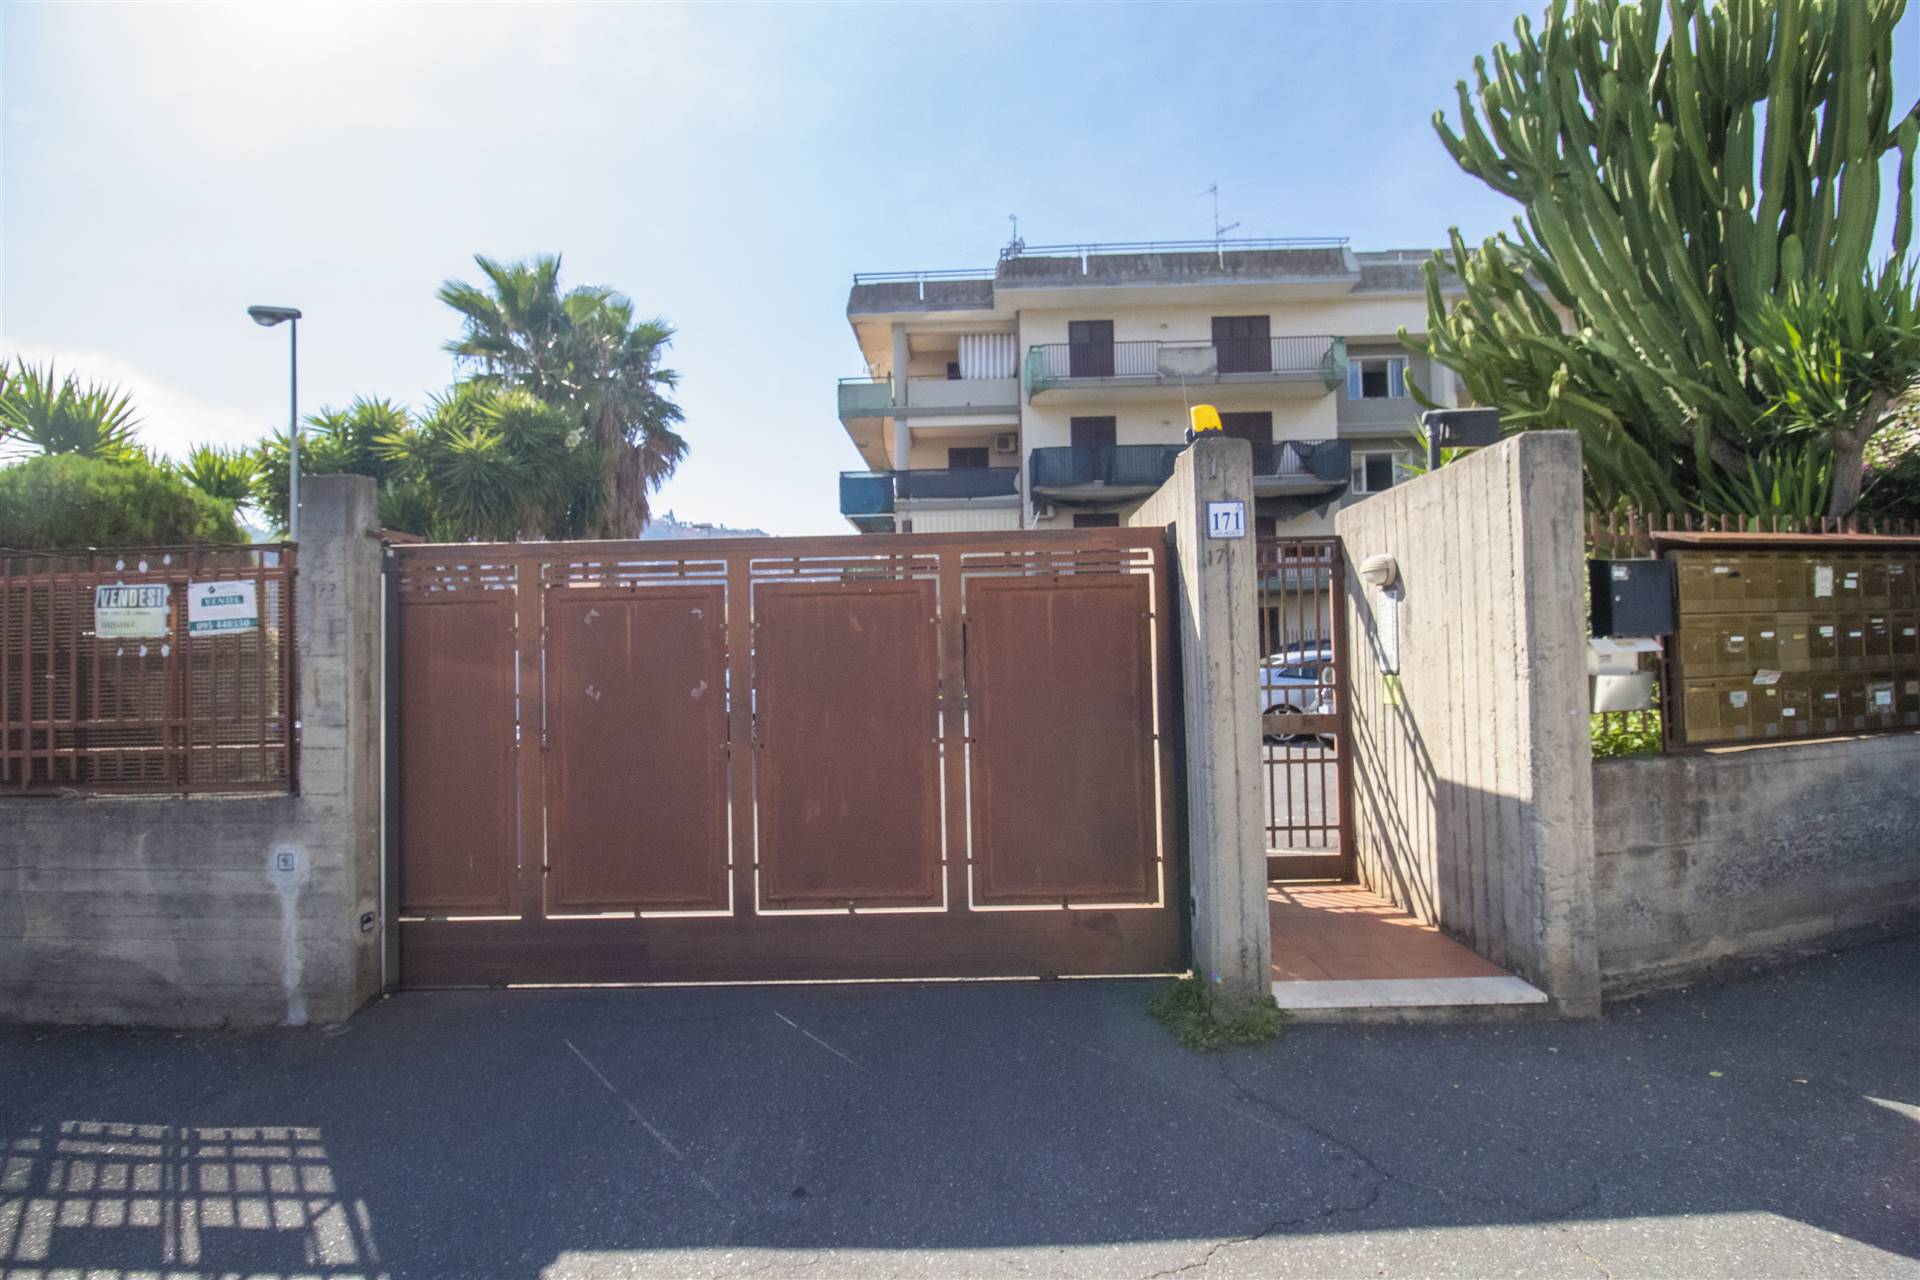 NIZZETI, ACI CATENA, Apartment for sale of 96 Sq. mt., Good condition, Heating Individual heating system, Energetic class: G, placed at 1°, composed 